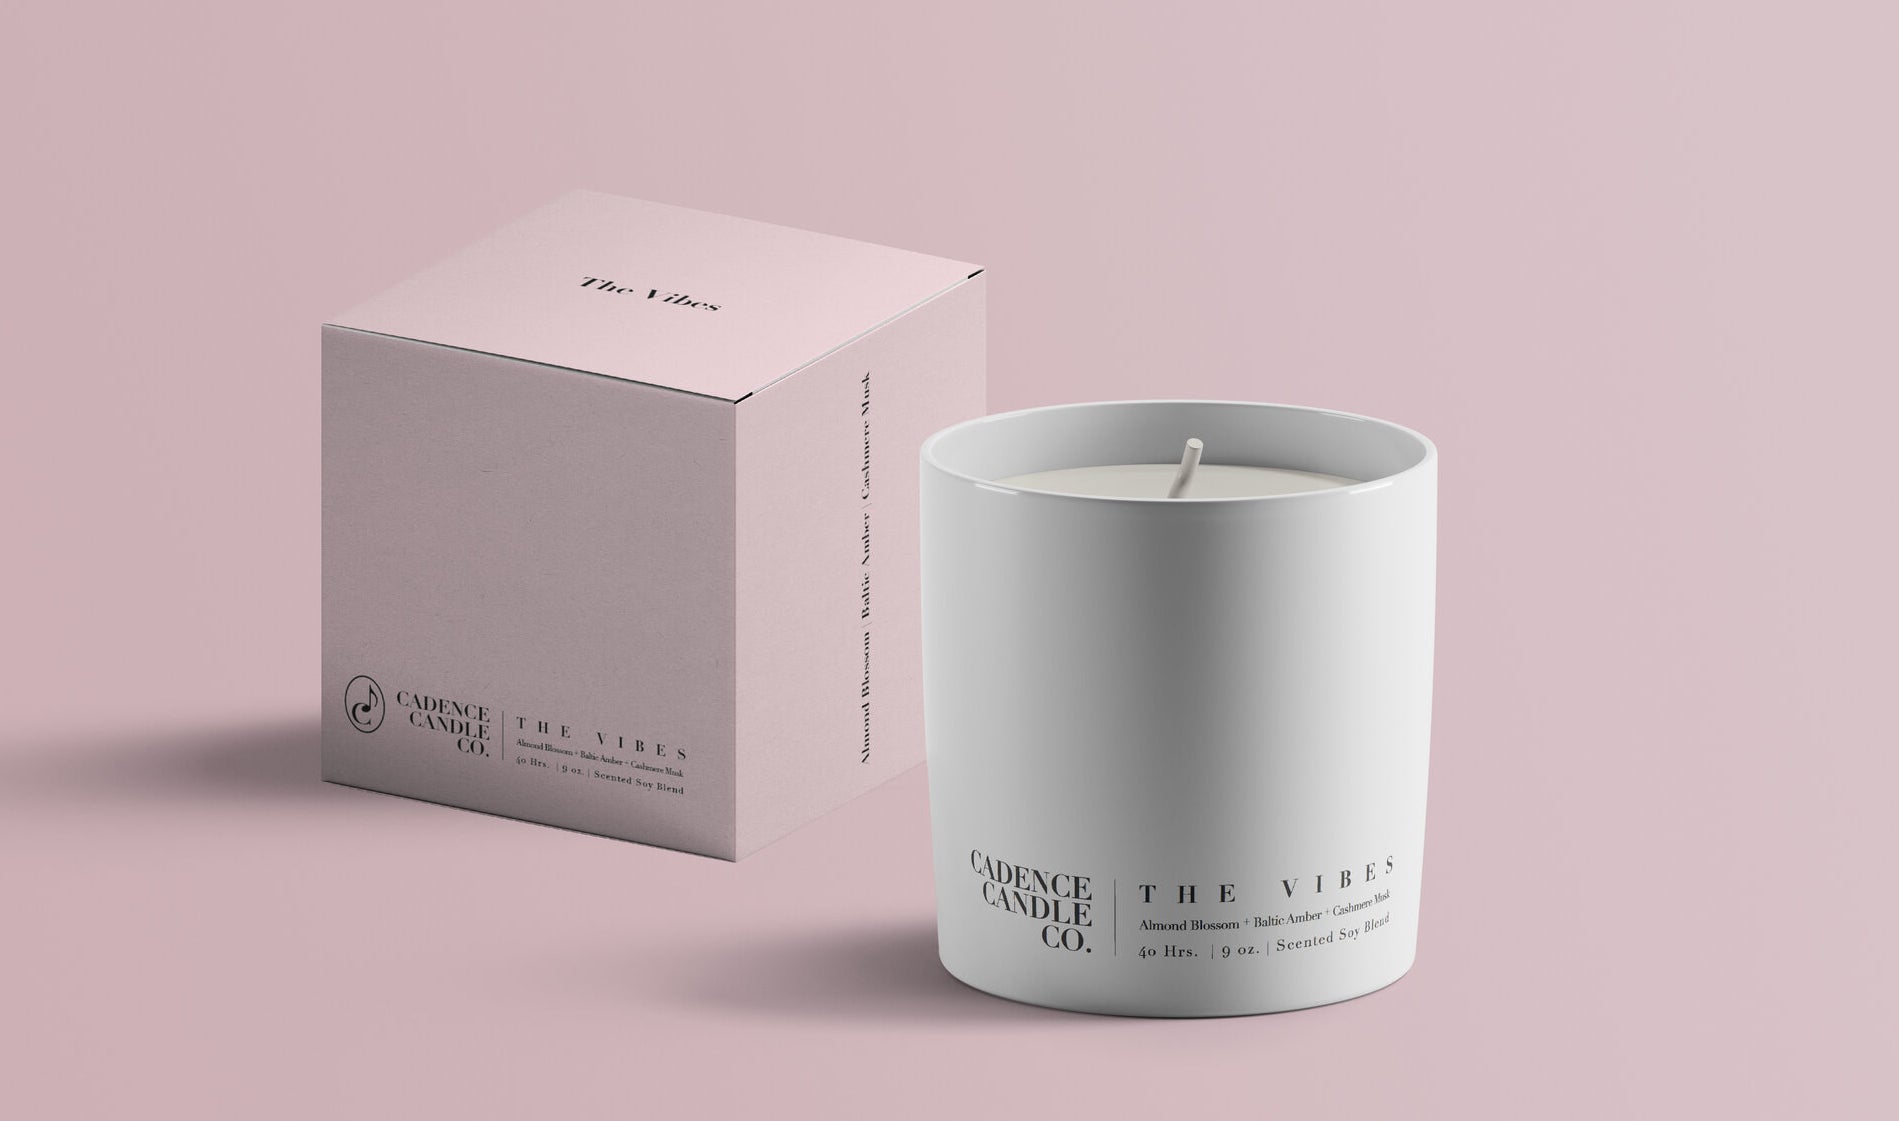 a white candle that says &quot;the vibes&quot; on it next to a pale blue box